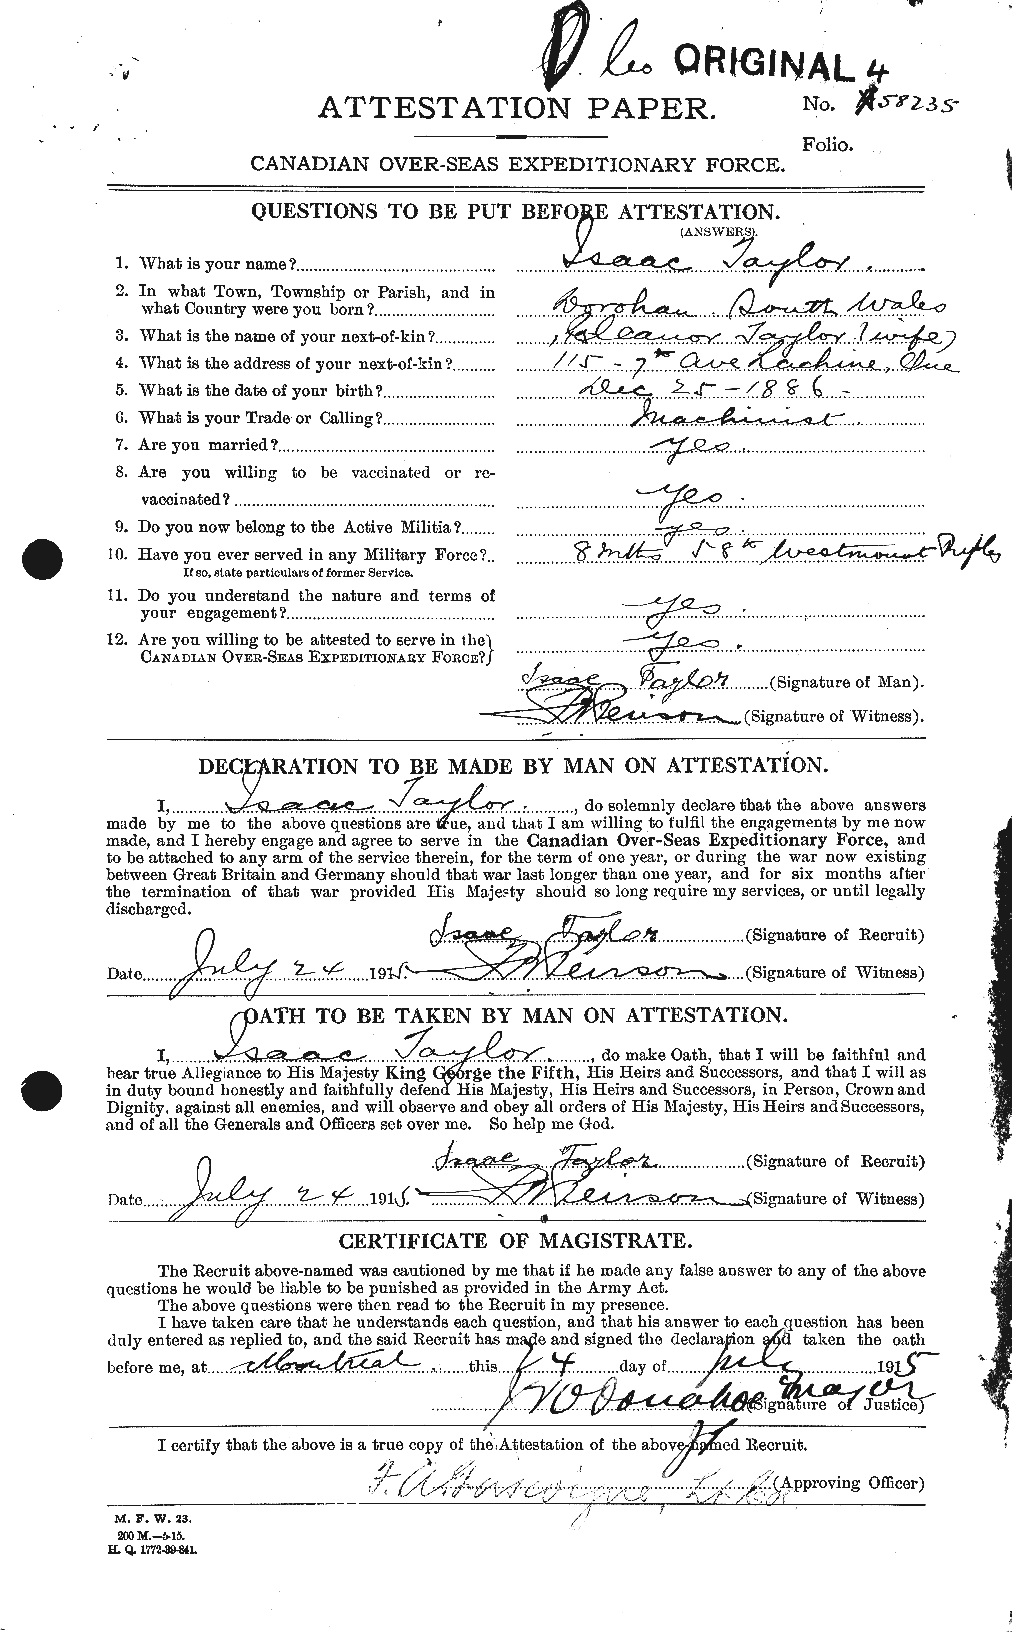 Personnel Records of the First World War - CEF 626628a